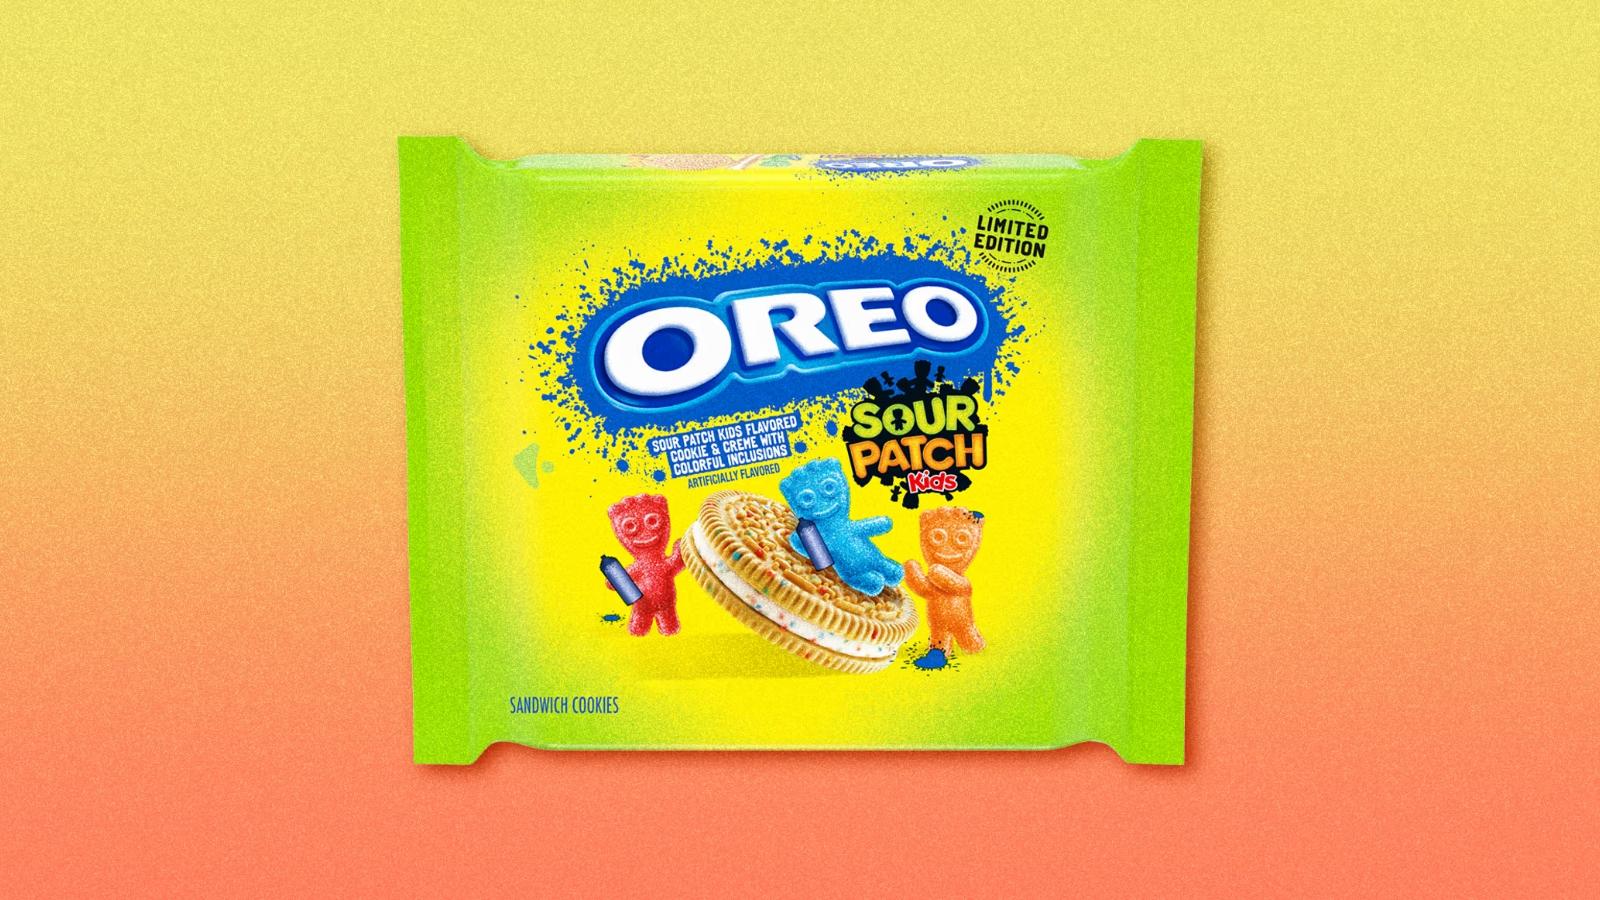 Sour Patch kids oreo collab